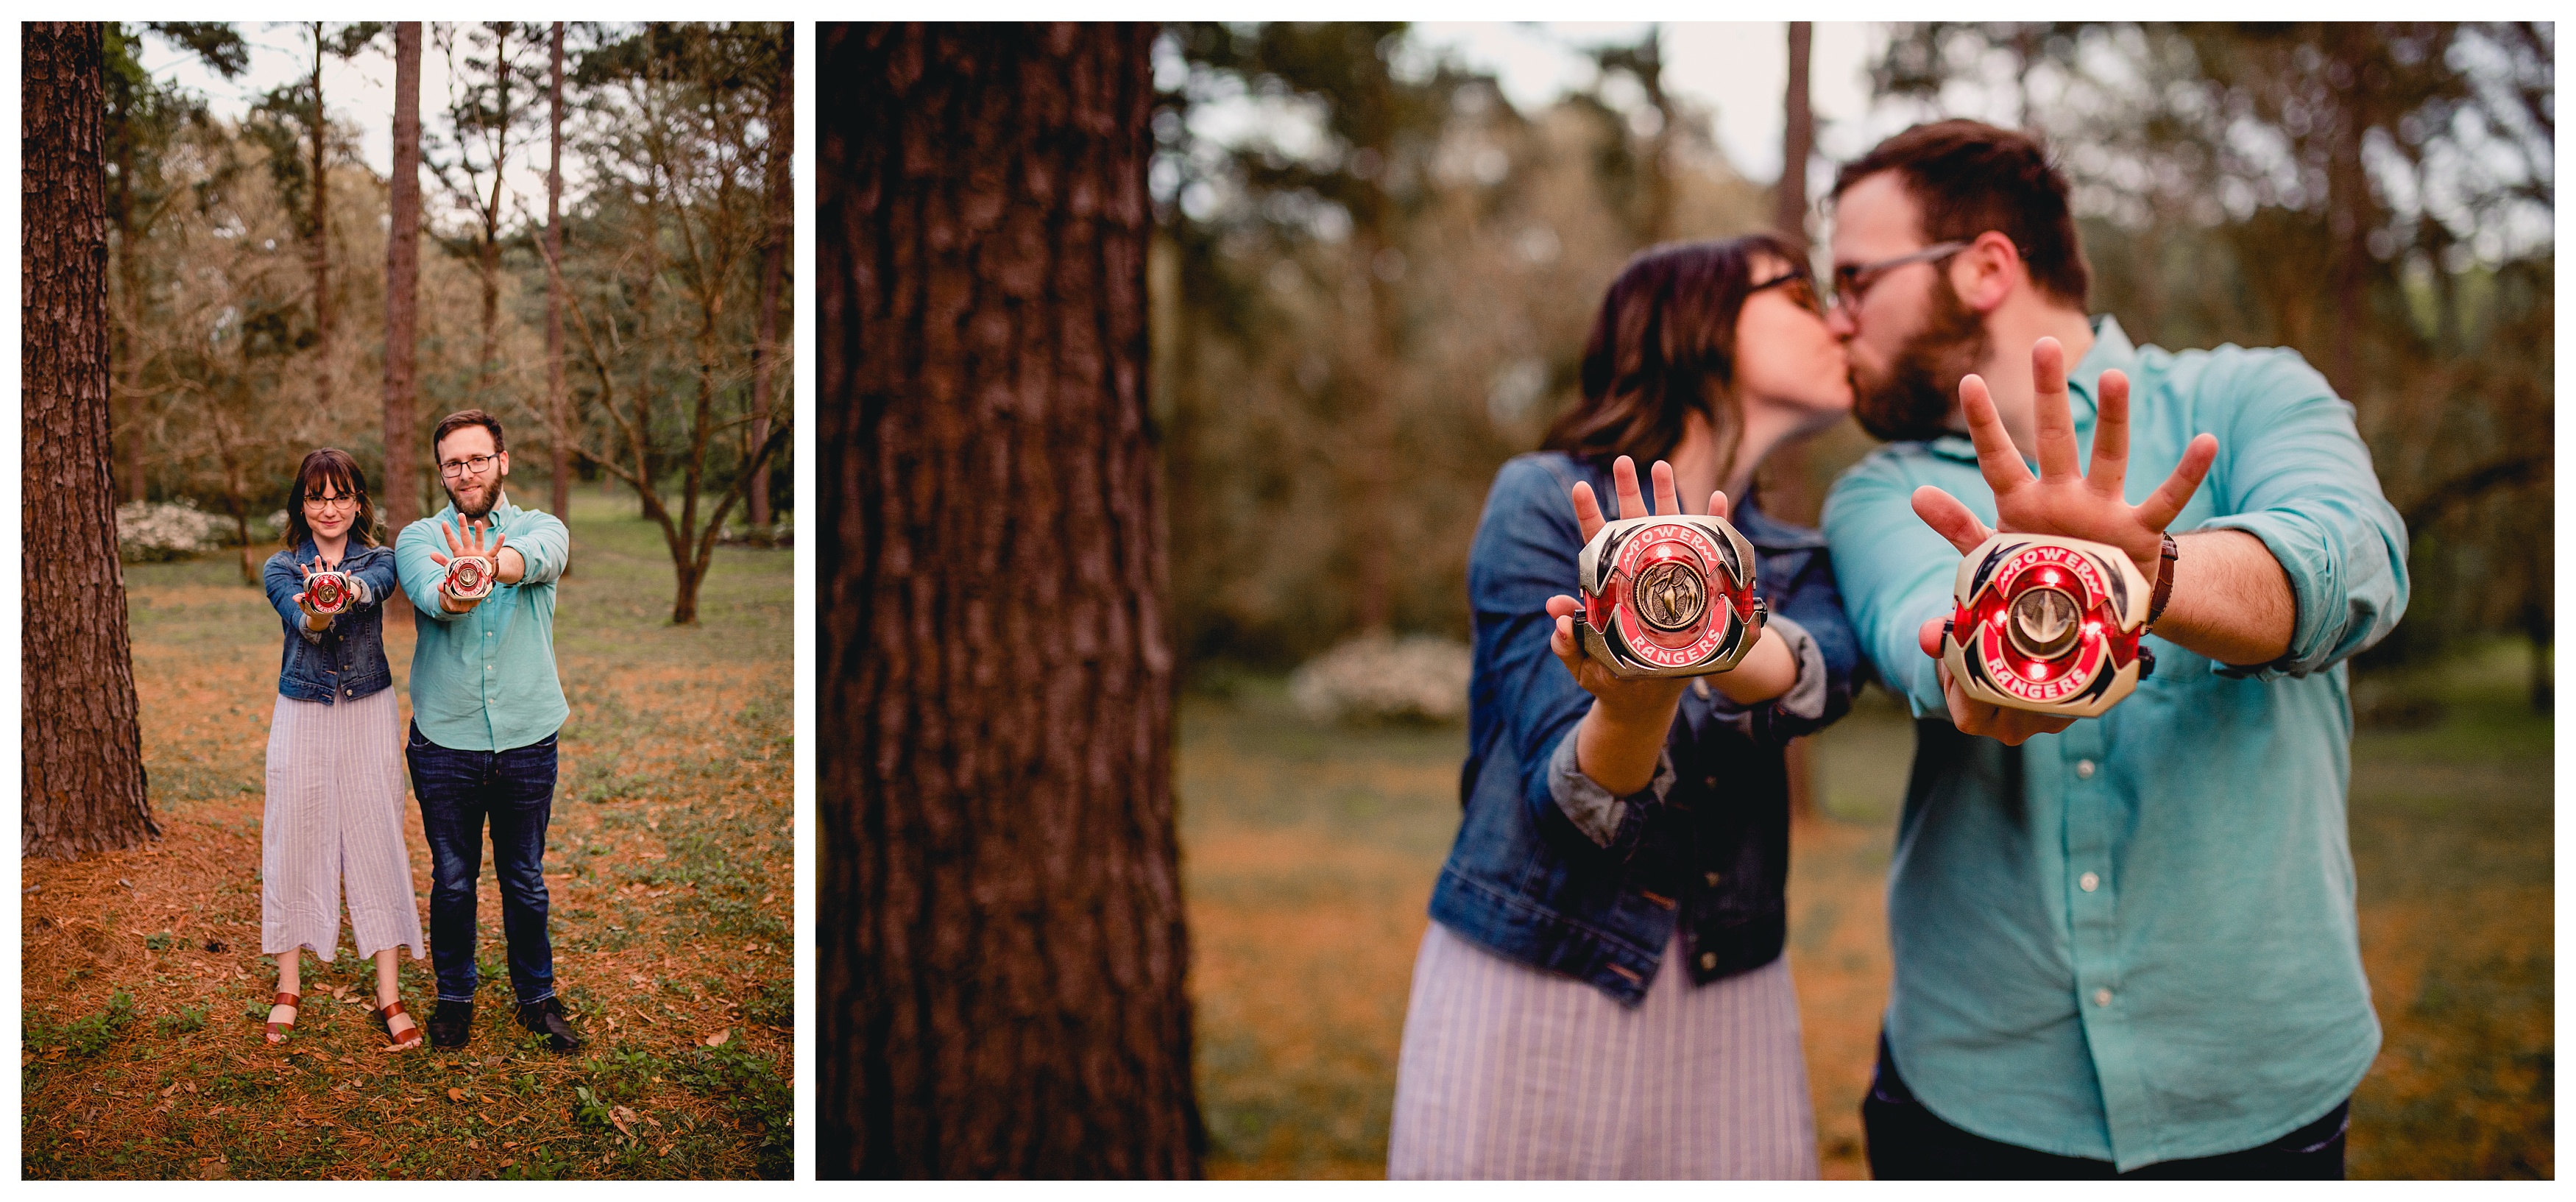 It's morphing time! Silly engagement photo with ninja turtles. Shelly Williams Photography